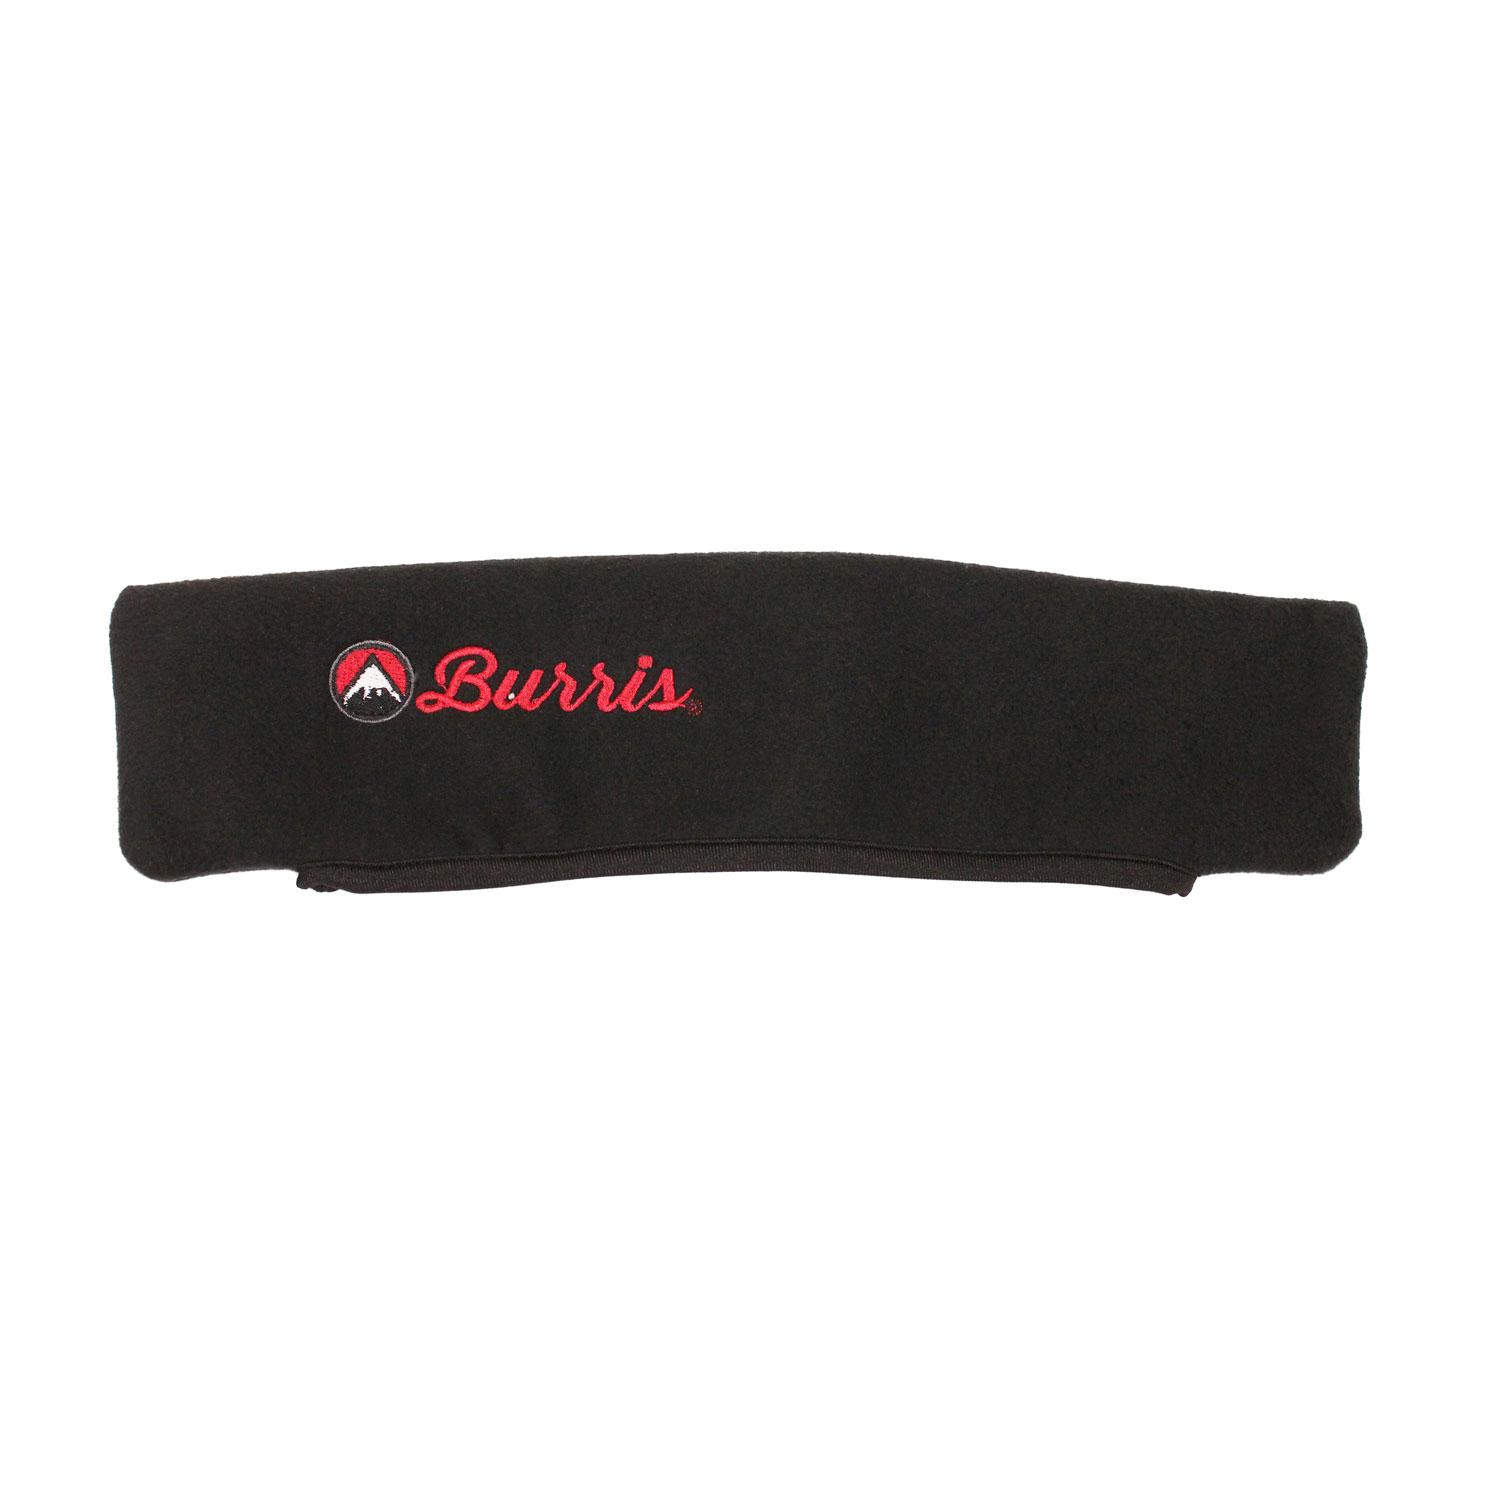 Burris Logo - Details about Burris Waterproof Scope Cover Small Objective Bell Exterior  626061